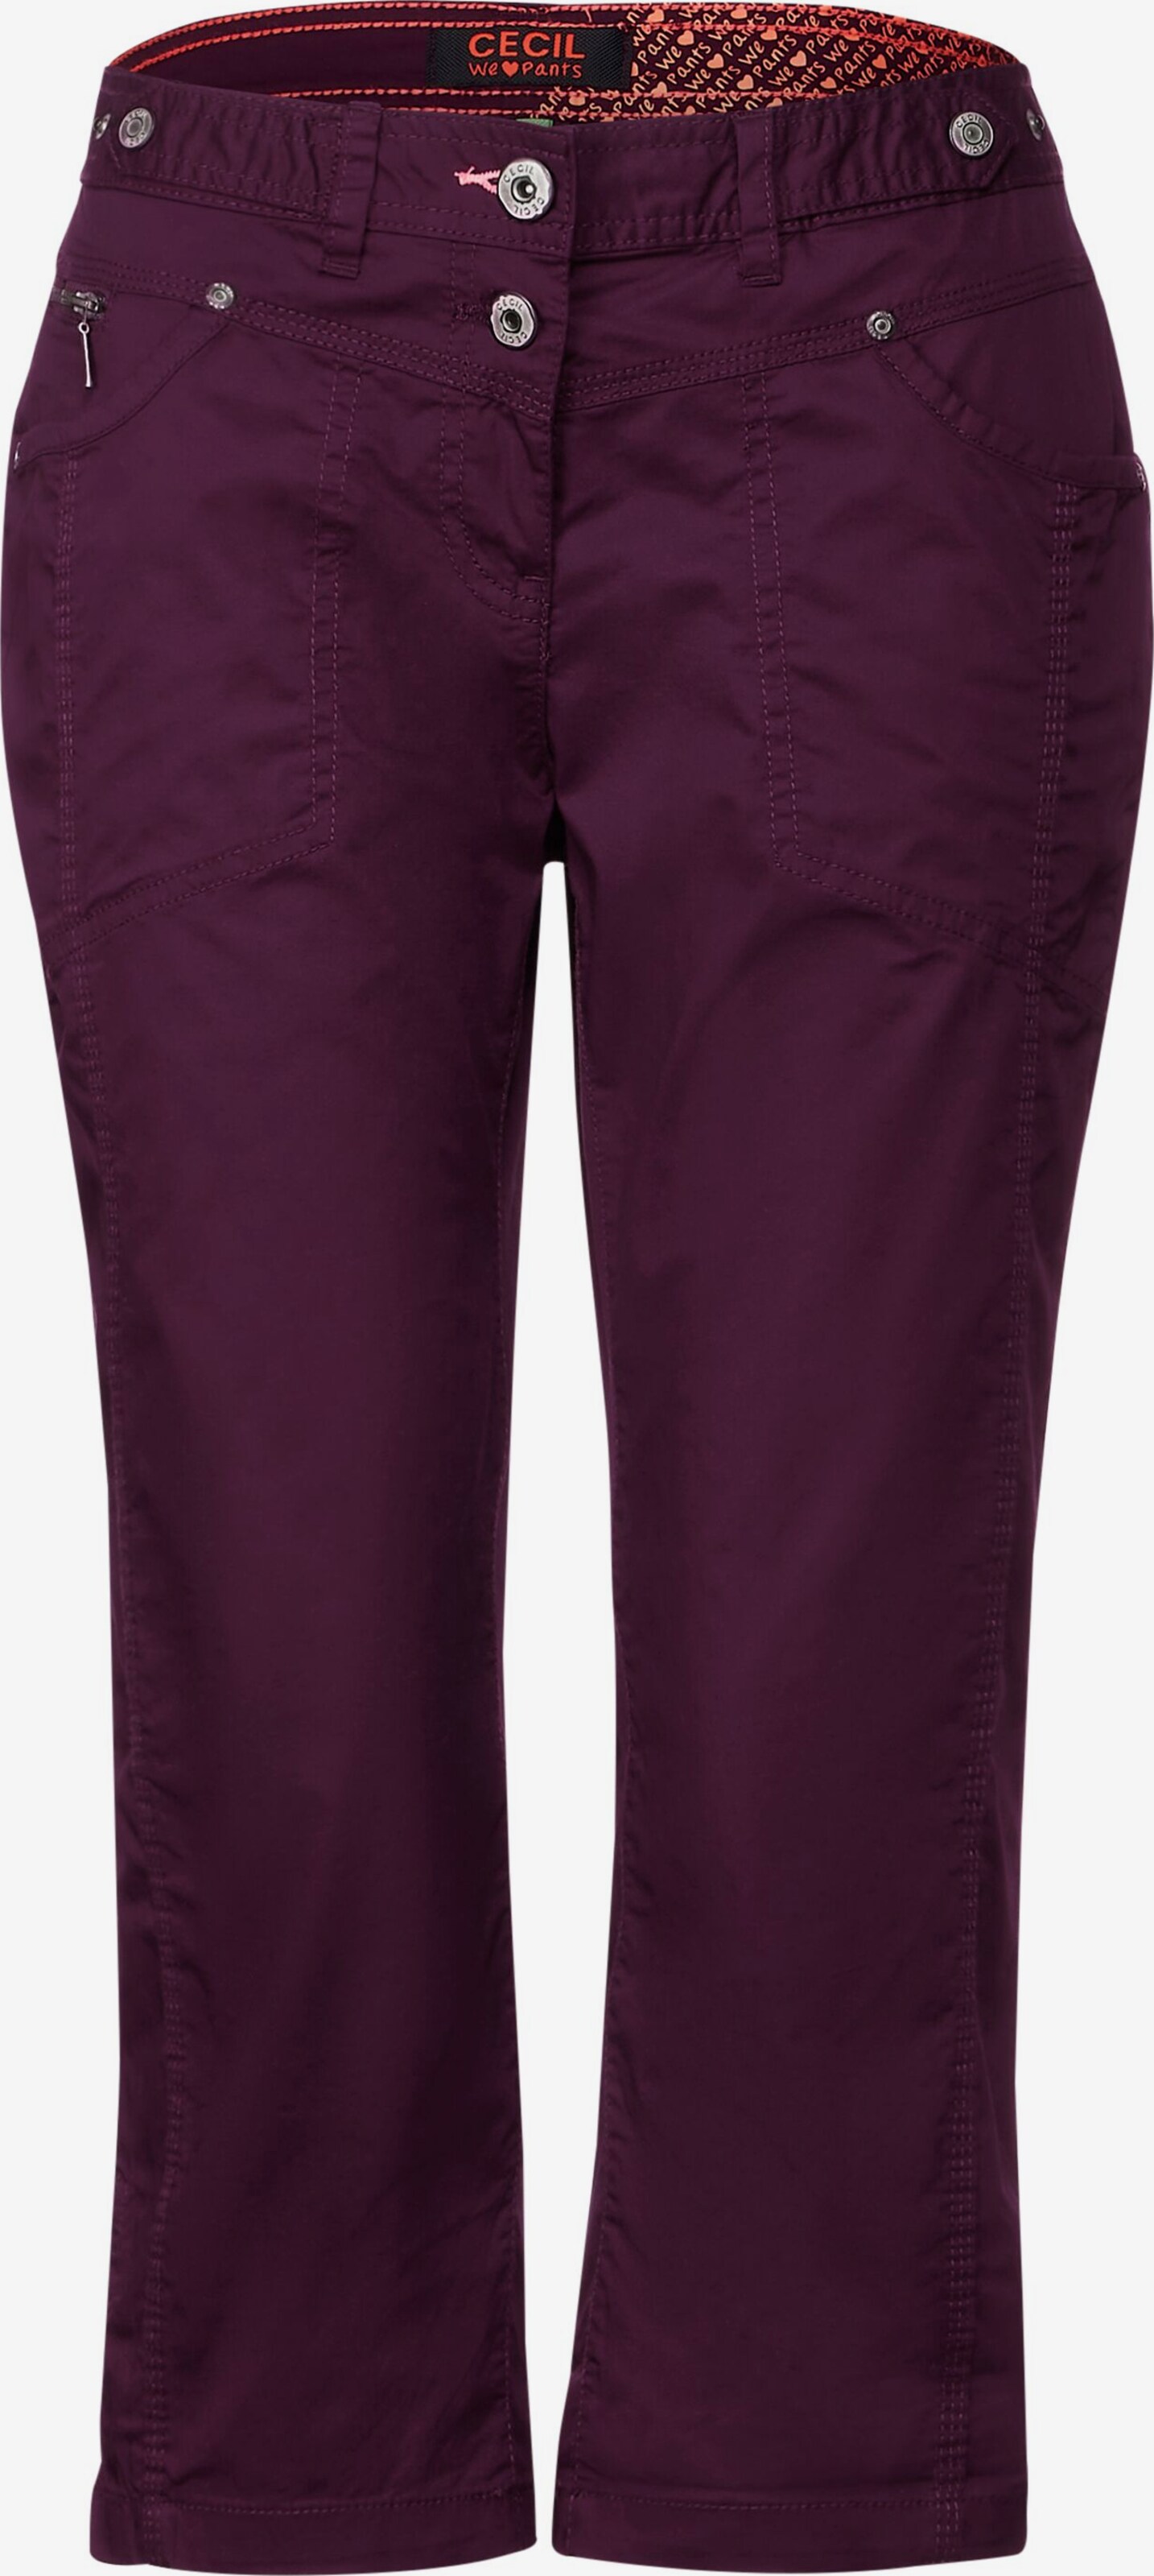 | YOU Regular Pleat-Front ABOUT in Pants Berry CECIL